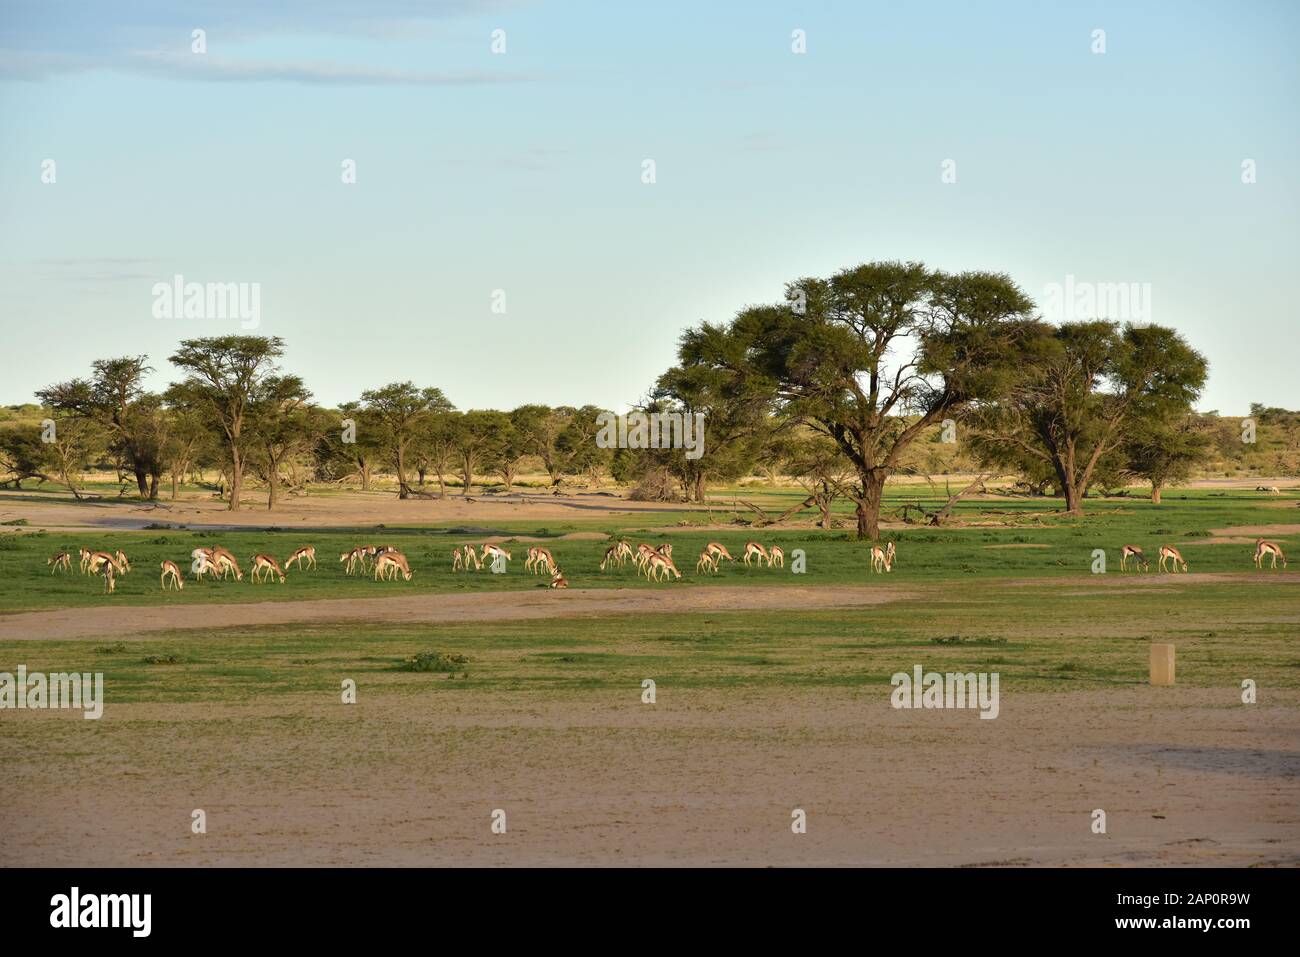 Herd of jumping jumping buck on late afterwithtag in Kgalagadi Transfrontier National Park, taken on February 24th, 2019. The Kgalagadi Transfrontier National Park was created in 1999 by merging the South African Kalahari-Gemsbok National Park and the Gemsbok National Park in Botswana and is a cross-border nature reserve in the Kalahari Desert with an area of around 38,000 square kilometers. The park is particularly known for its lions, which can often be found there, but also for numerous other wild animals that live here. Photo: Matthias Toedt/dpa-Zentralbild/ZB/Picture Alliance | usag Stock Photo